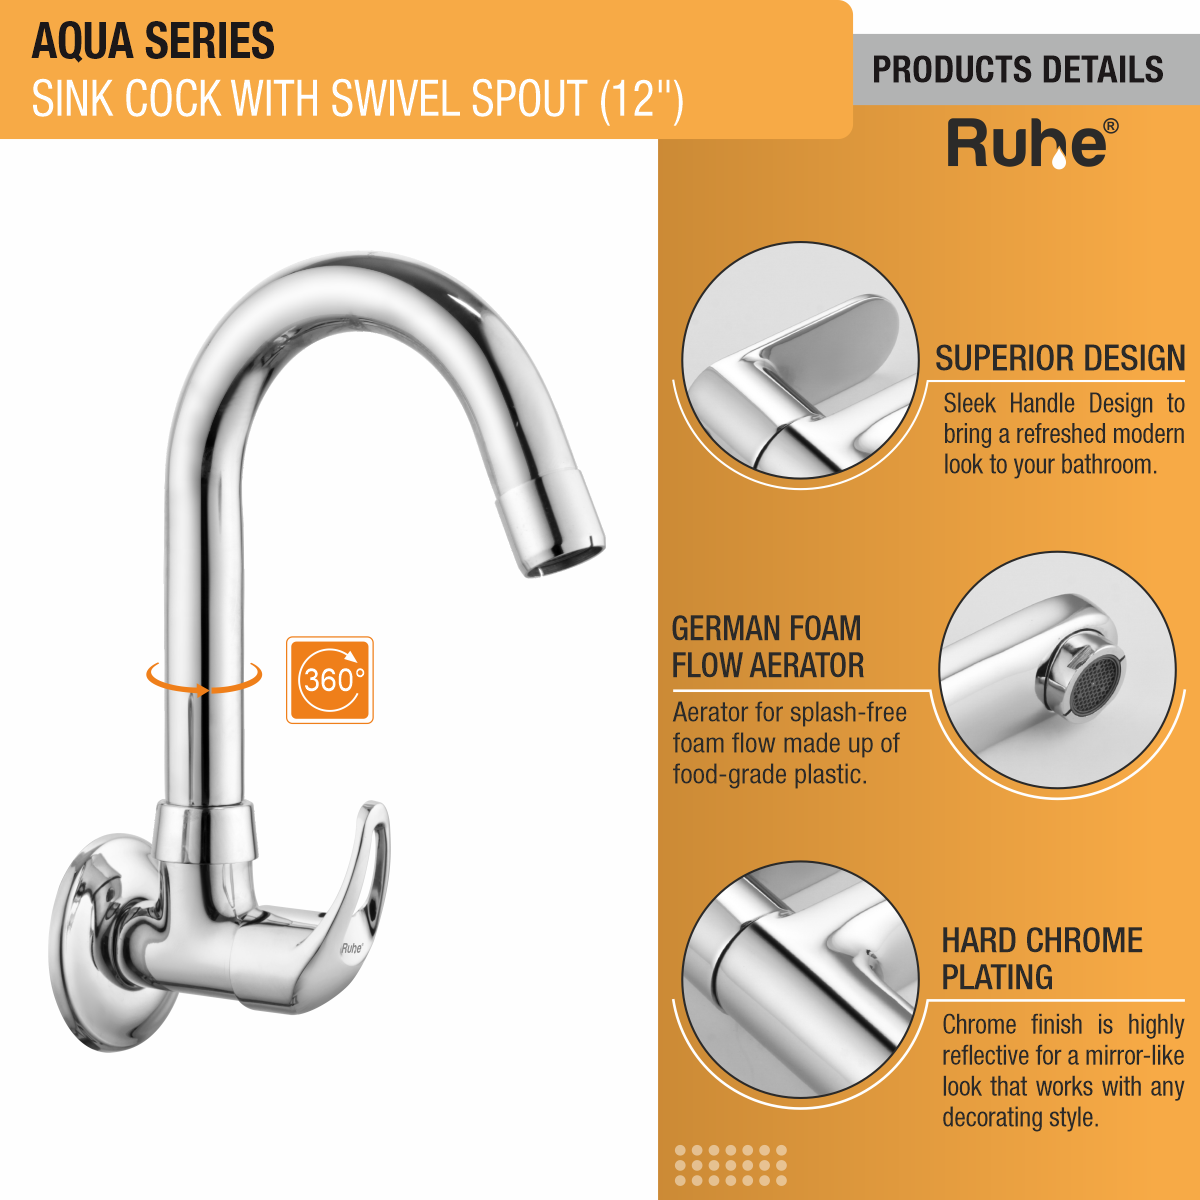 Aqua Sink Tap with Small (12 inches) Round Swivel Spout Faucet product details